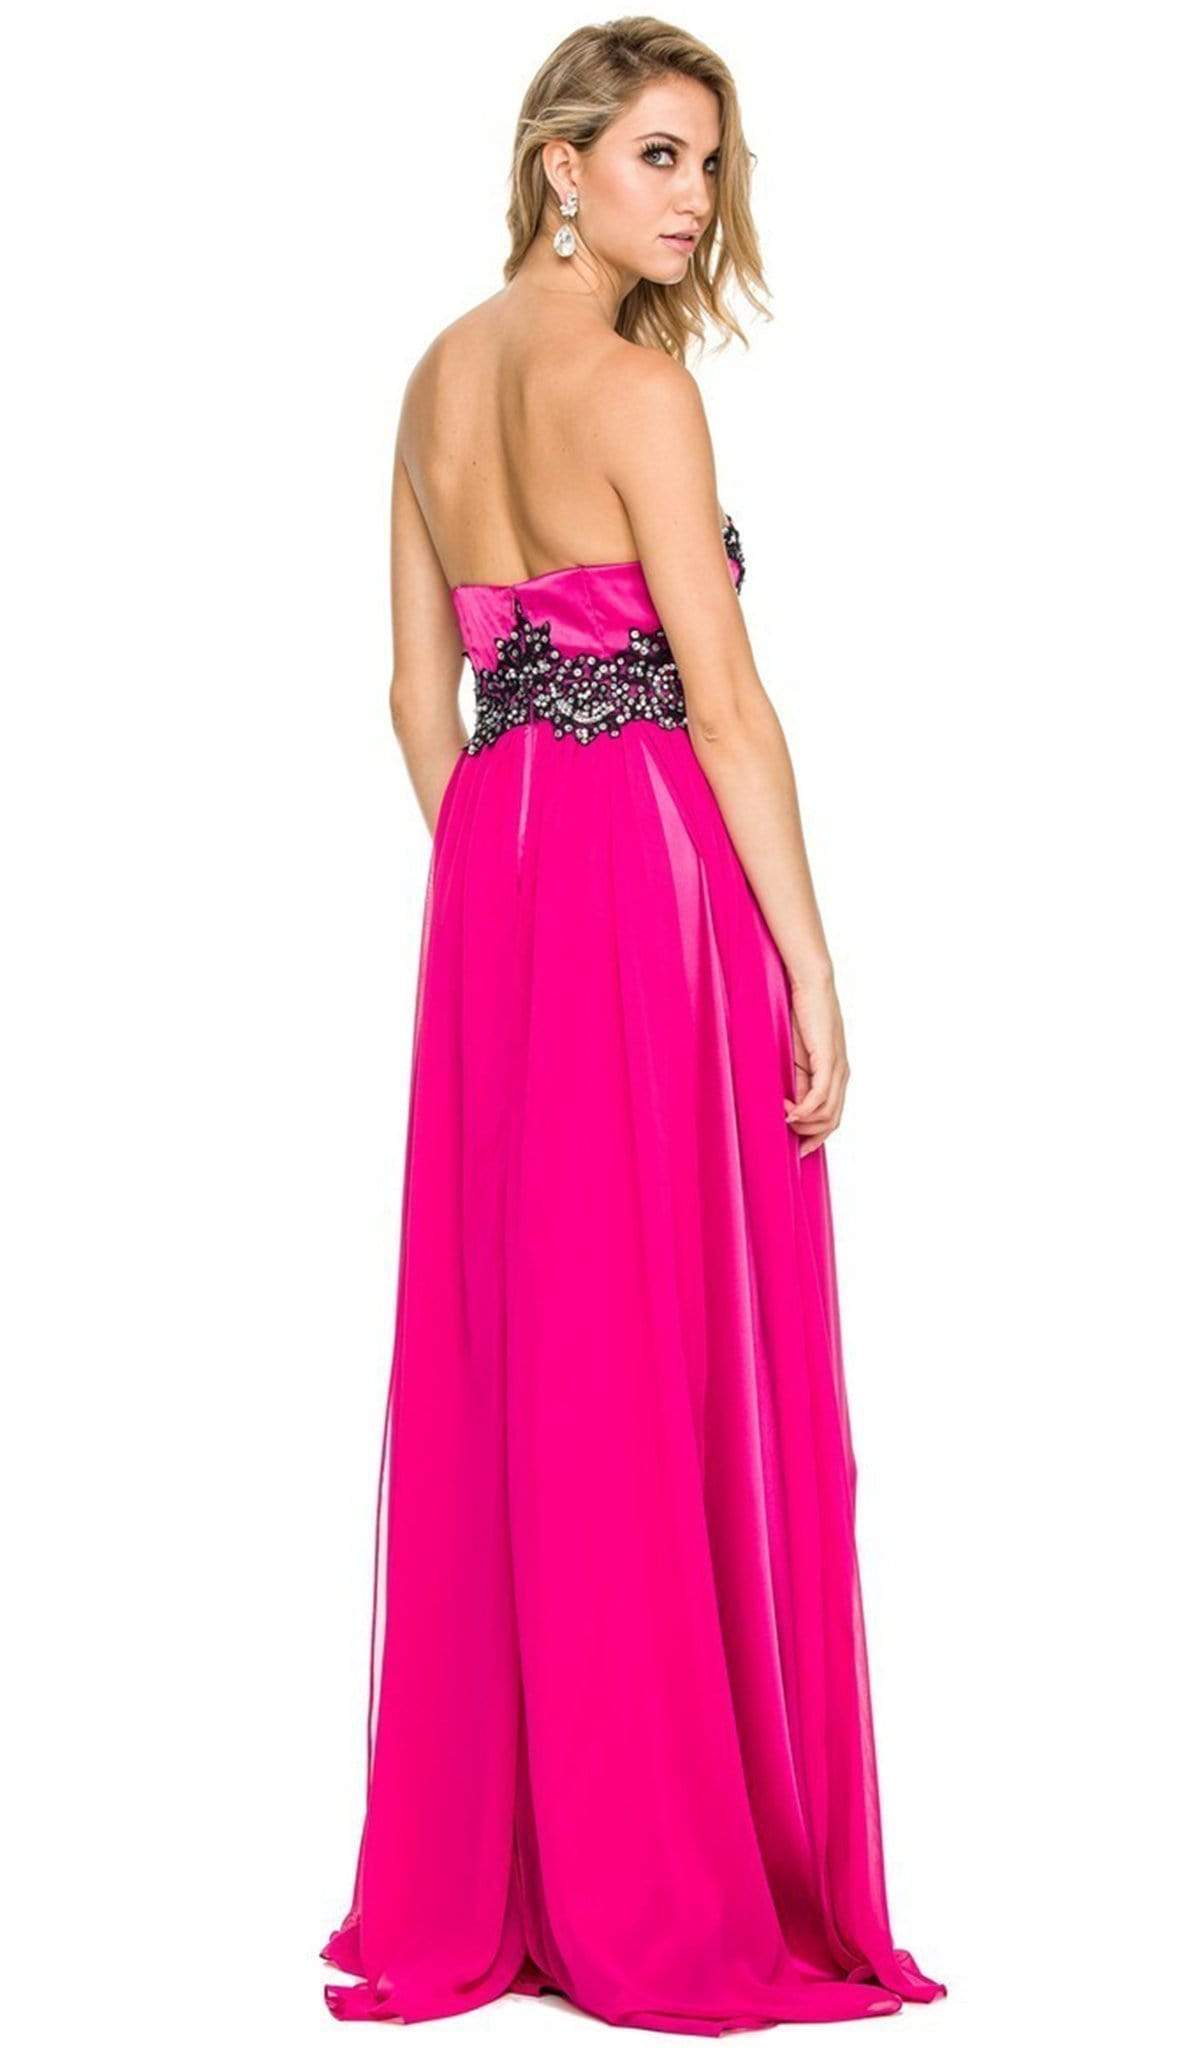 Nox Anabel - 2554 Embellished Semi-Sweetheart A-line Dress Special Occasion Dress